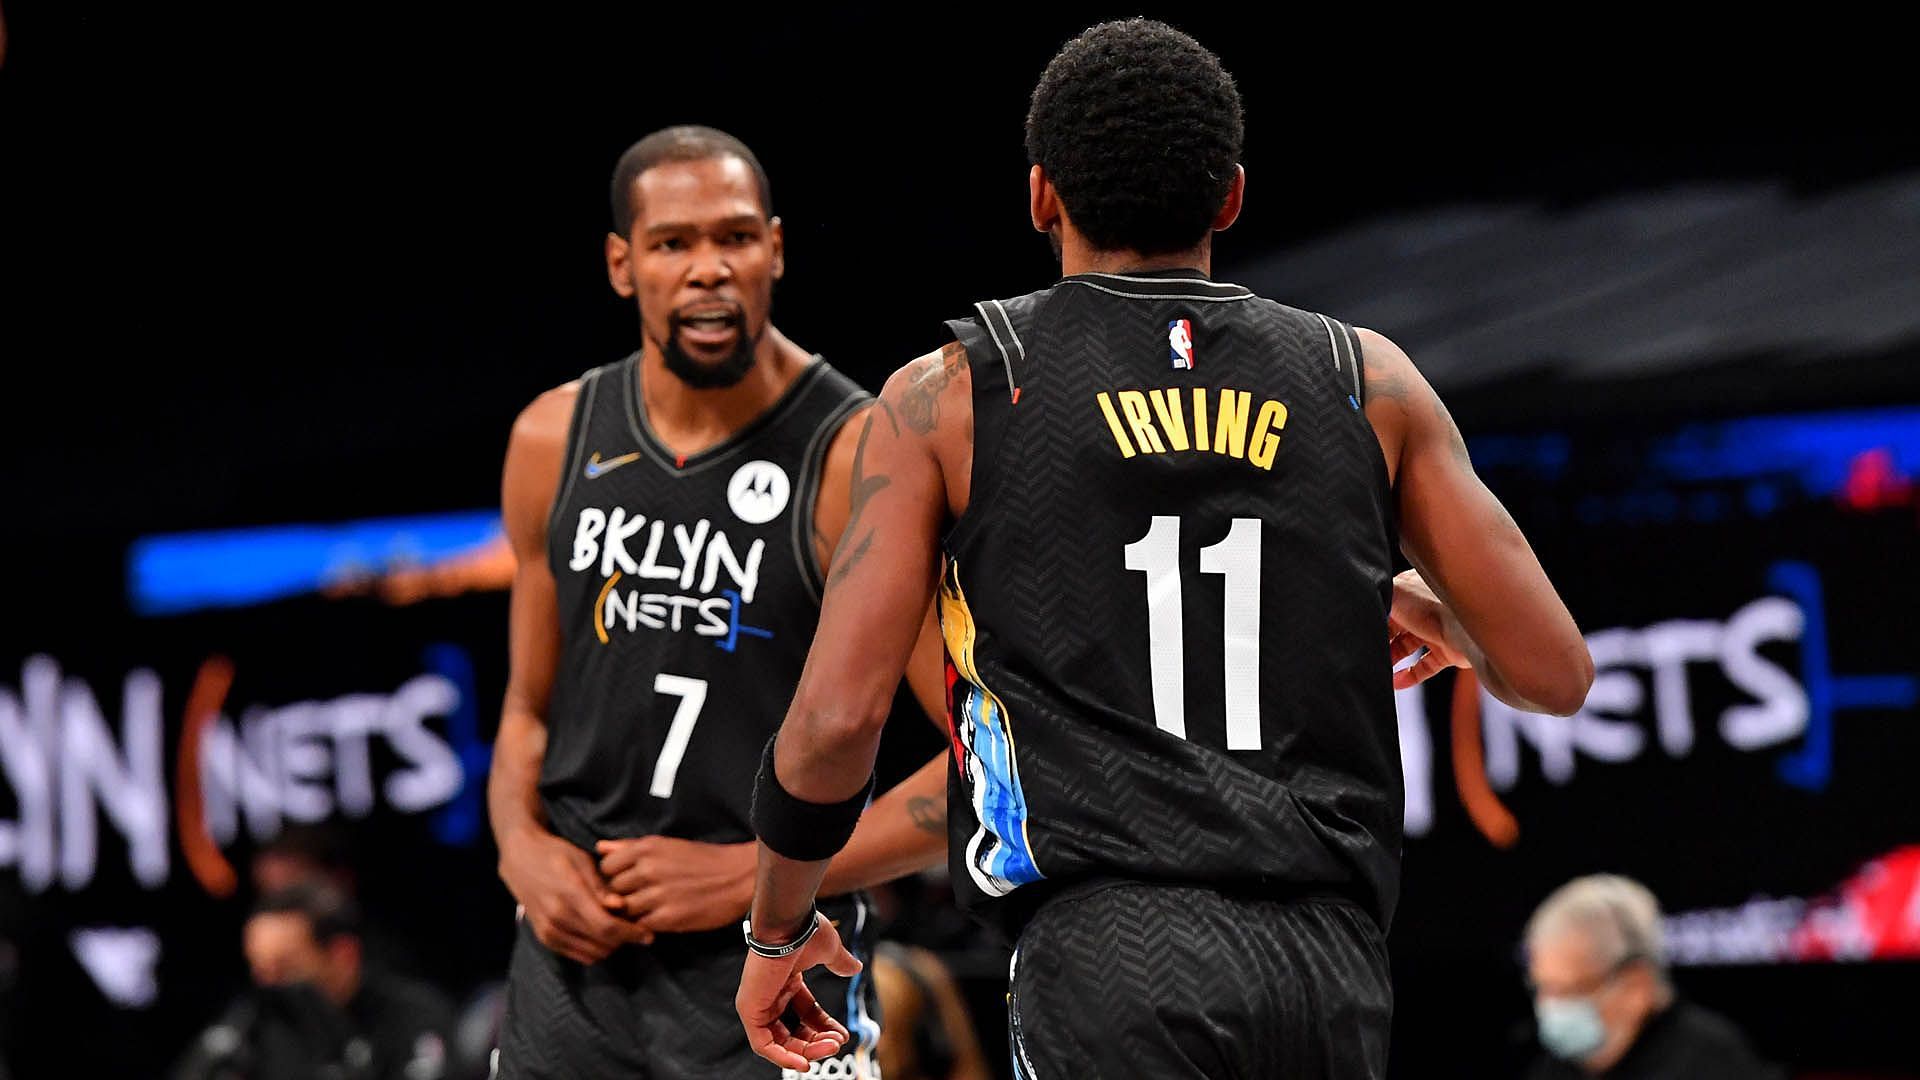 Tracy McGrady contends that no other duo in NBA history is as skilled as Kevin Durant and Kyrie Irving. [Photo: NBA.com]